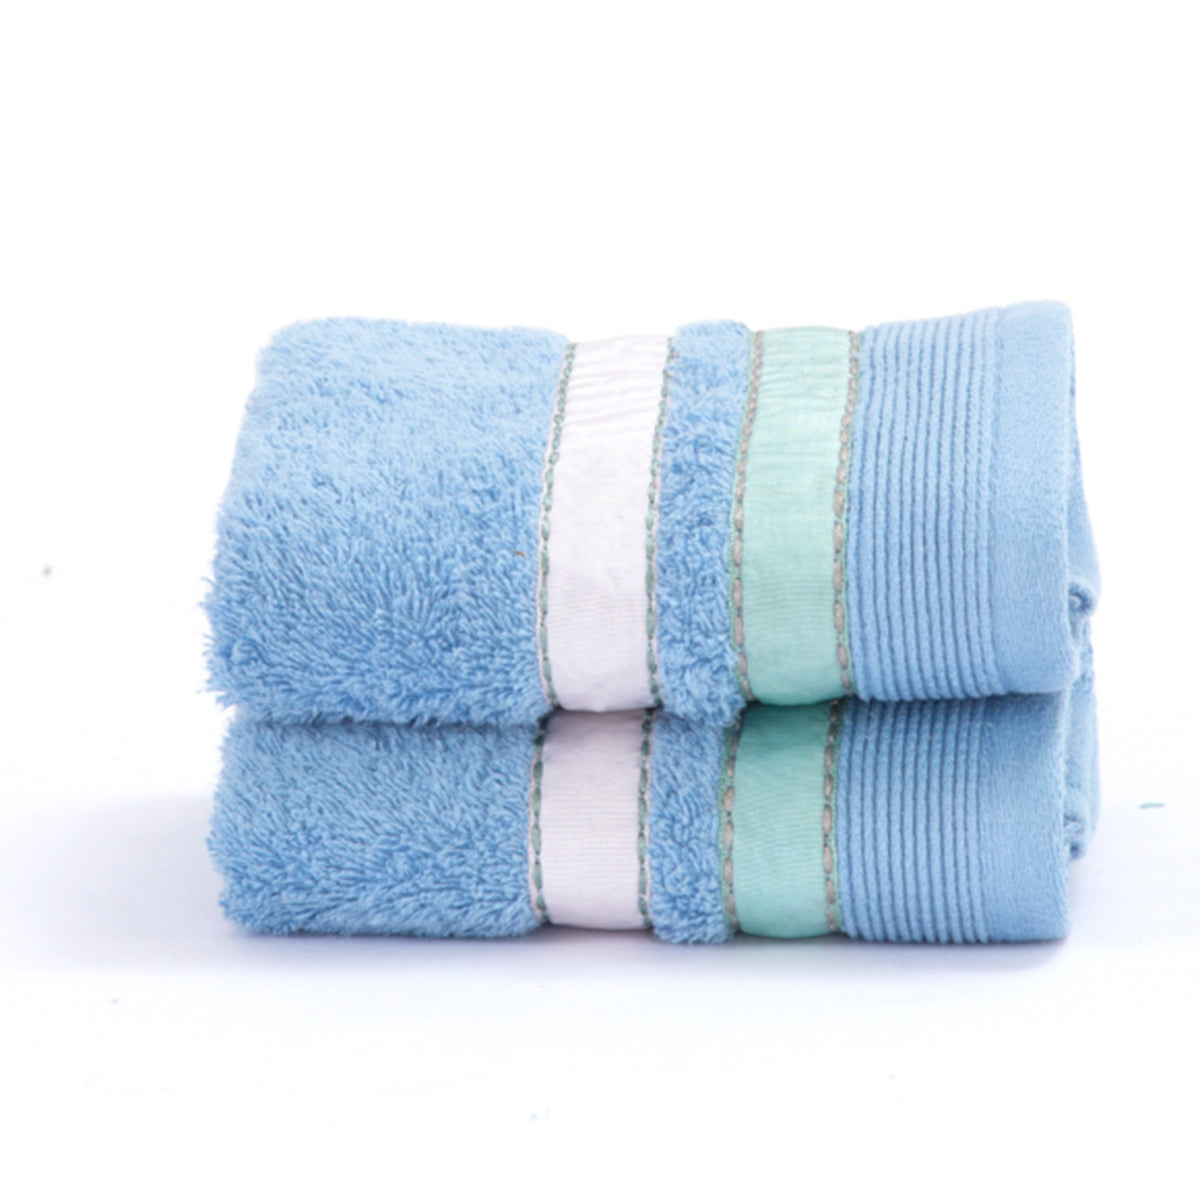 Modern Aesthetic Trapeze Antimicrobial Antifungal Super Absorbent & Soft Blue Towel Set